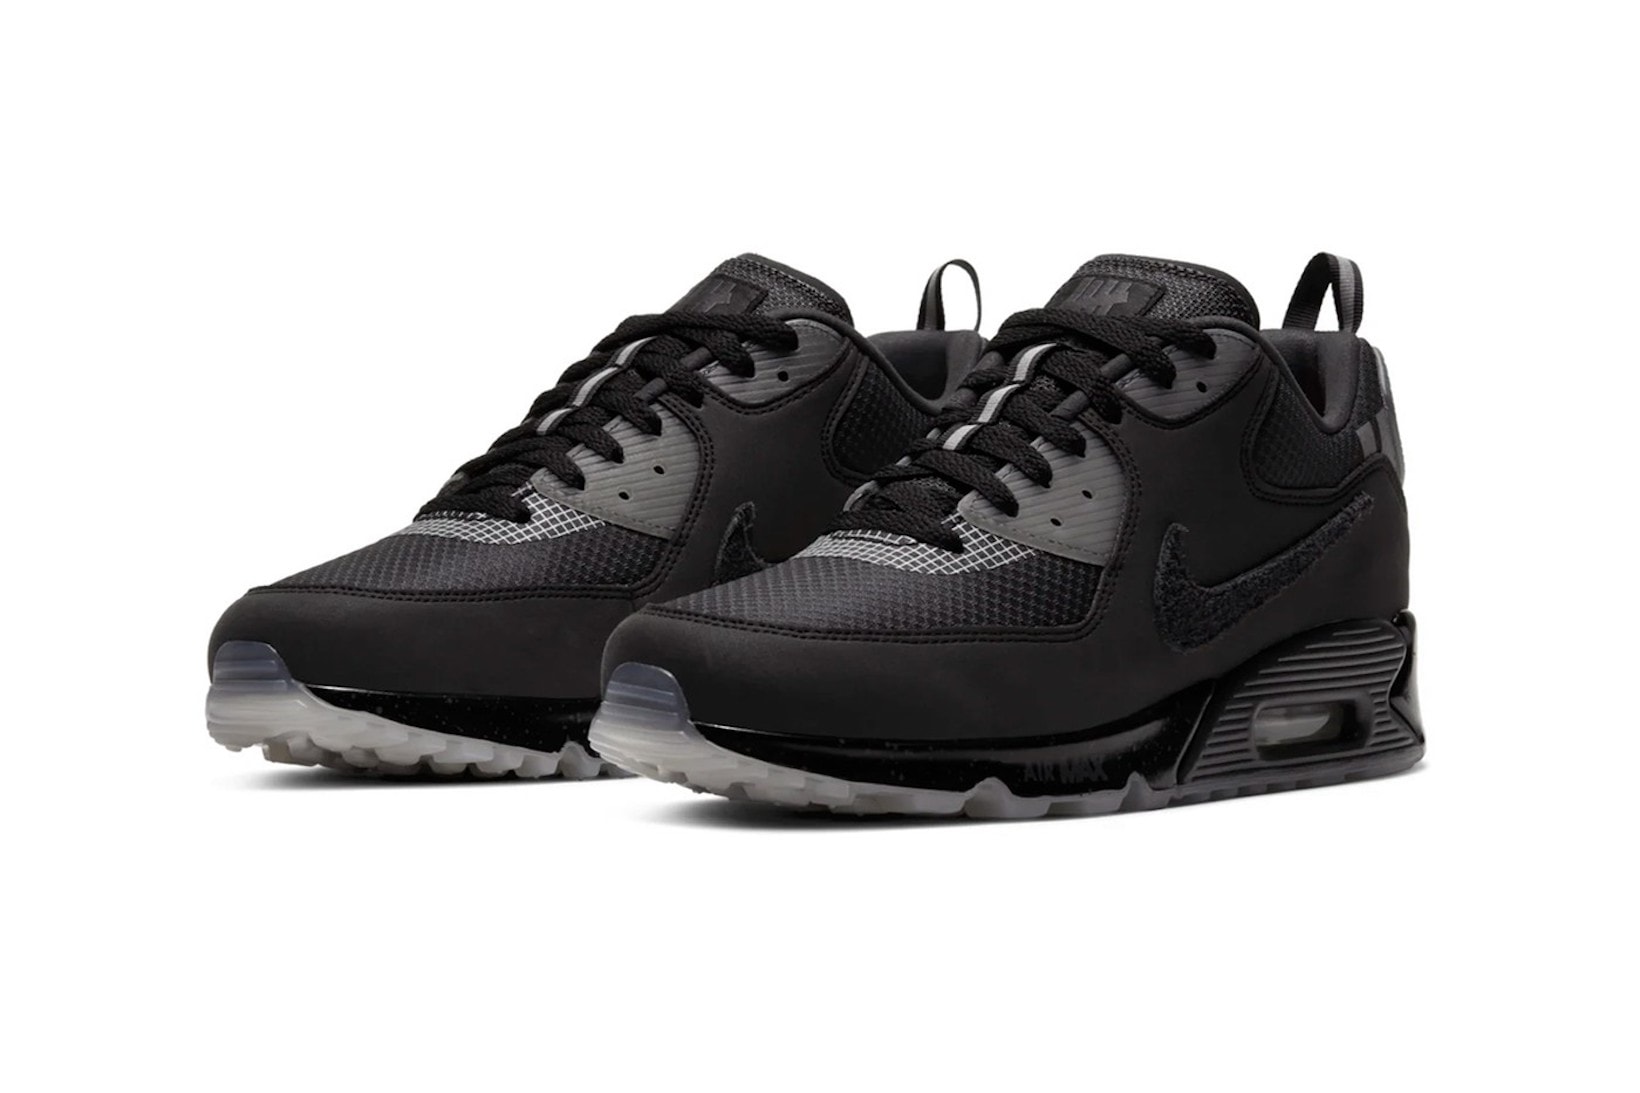 nike undefeated collaboration air max 90 sneakers black shoes footwear sneakerhead